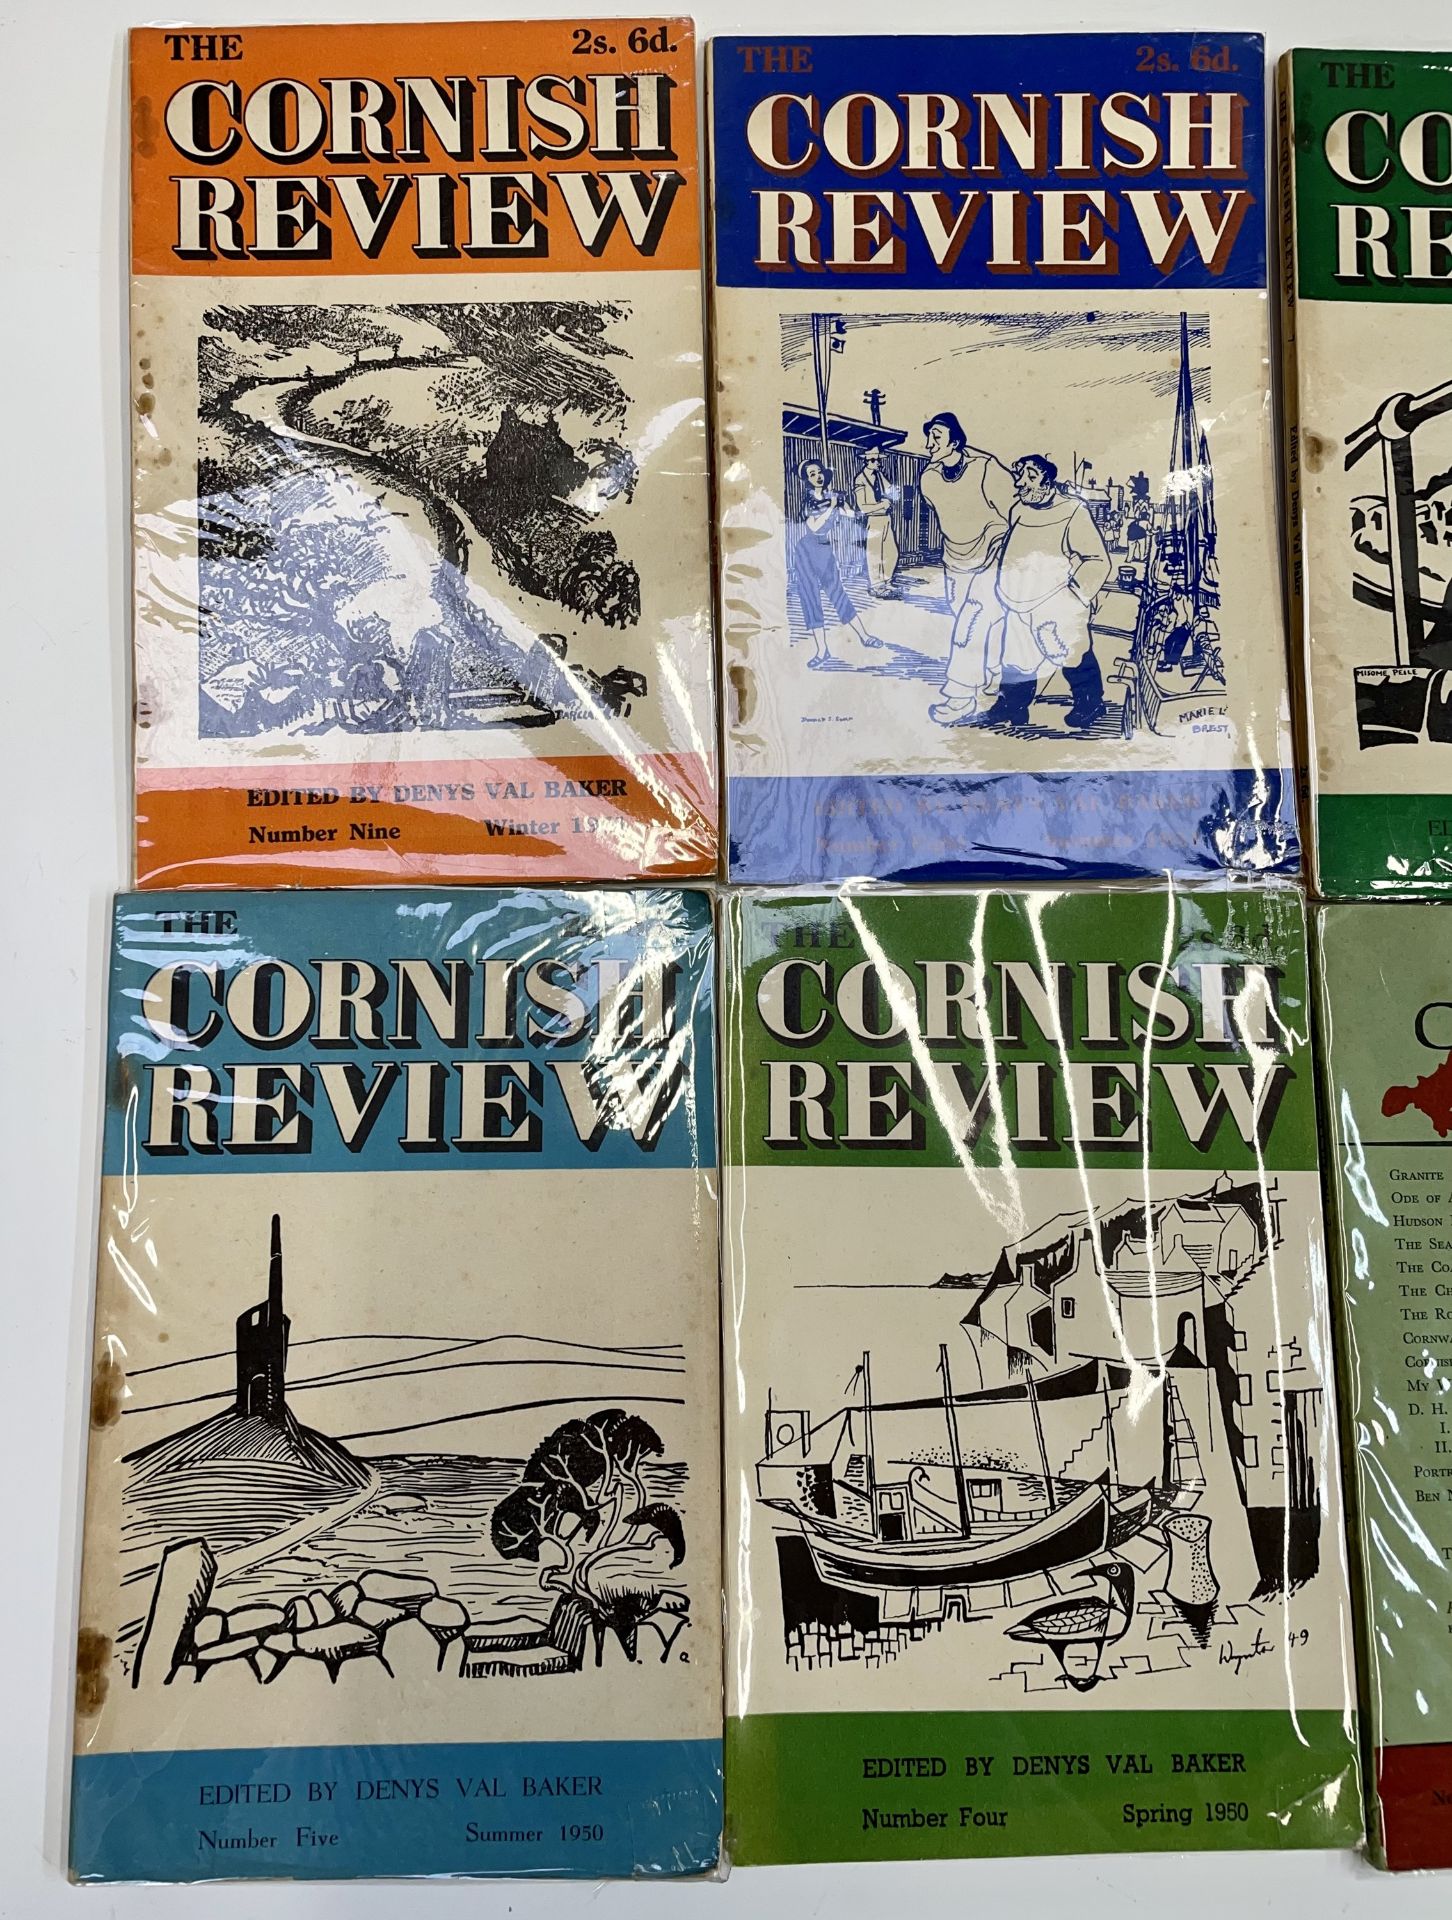 'The Cornish Review,' first nine issues, edited by Denys Val Baker, illustrated boards, cellophane - Image 6 of 7